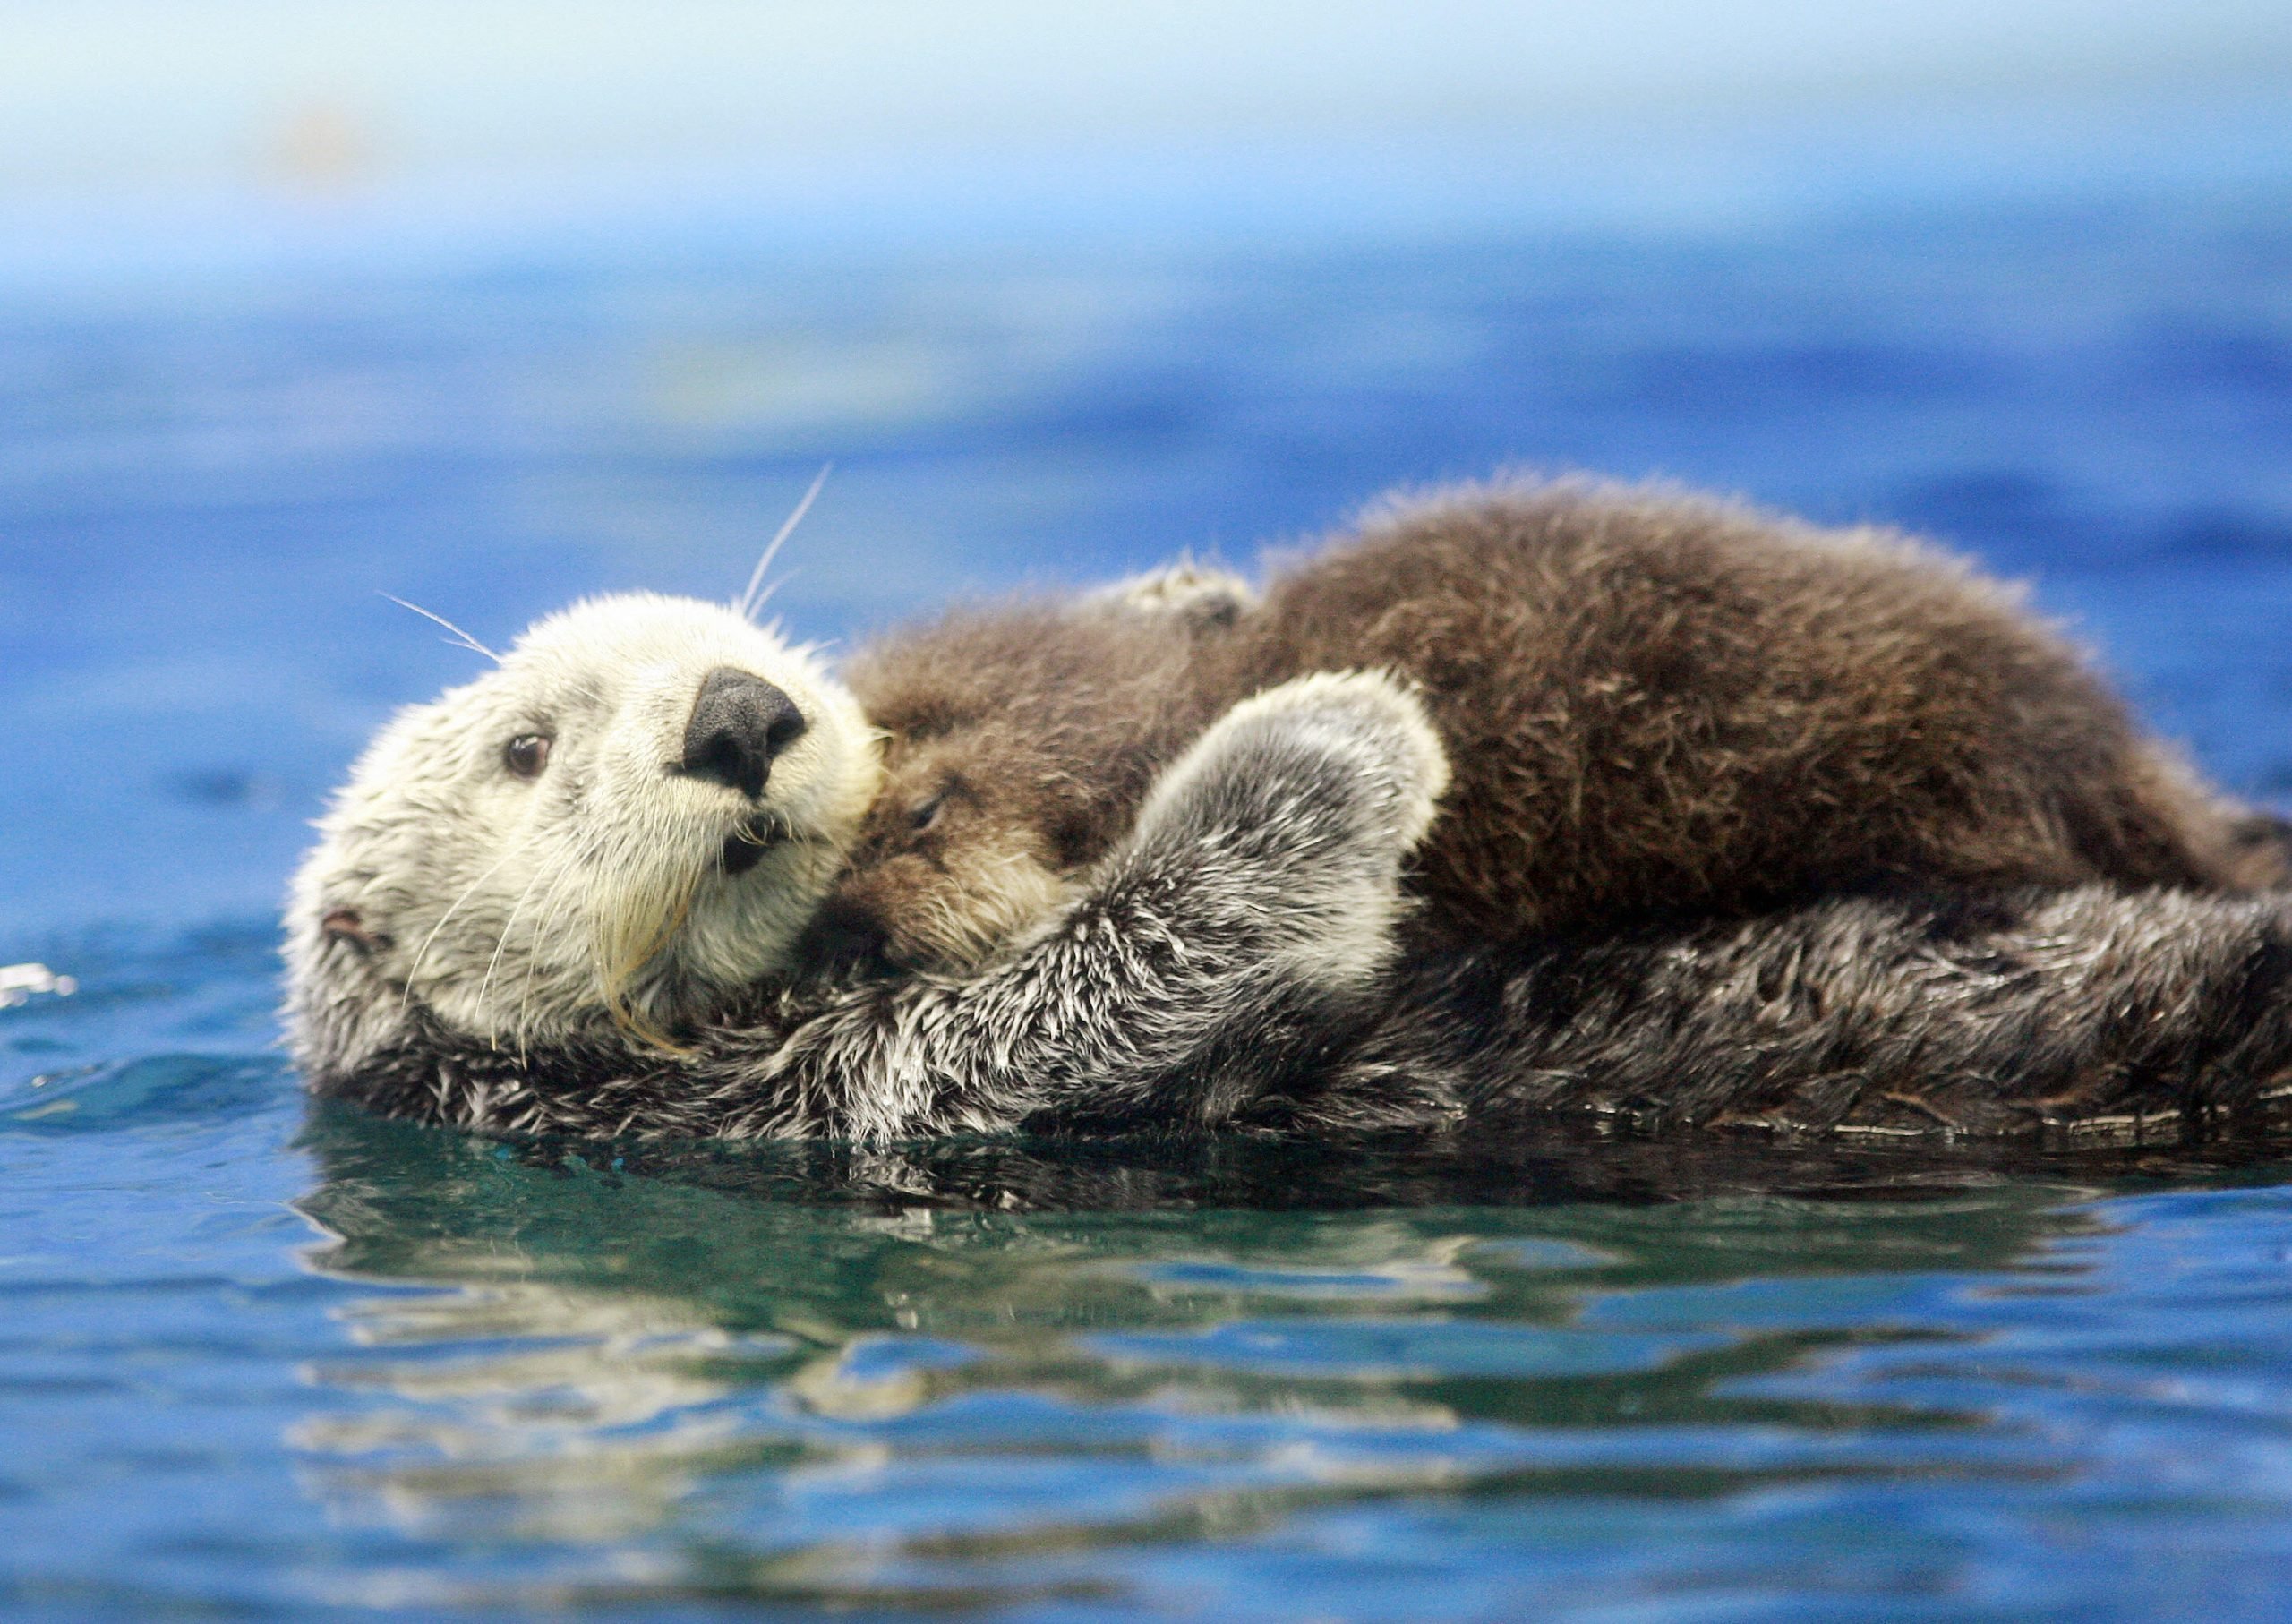 Adorable Photos of Baby Otters That'll Make Your Day Better